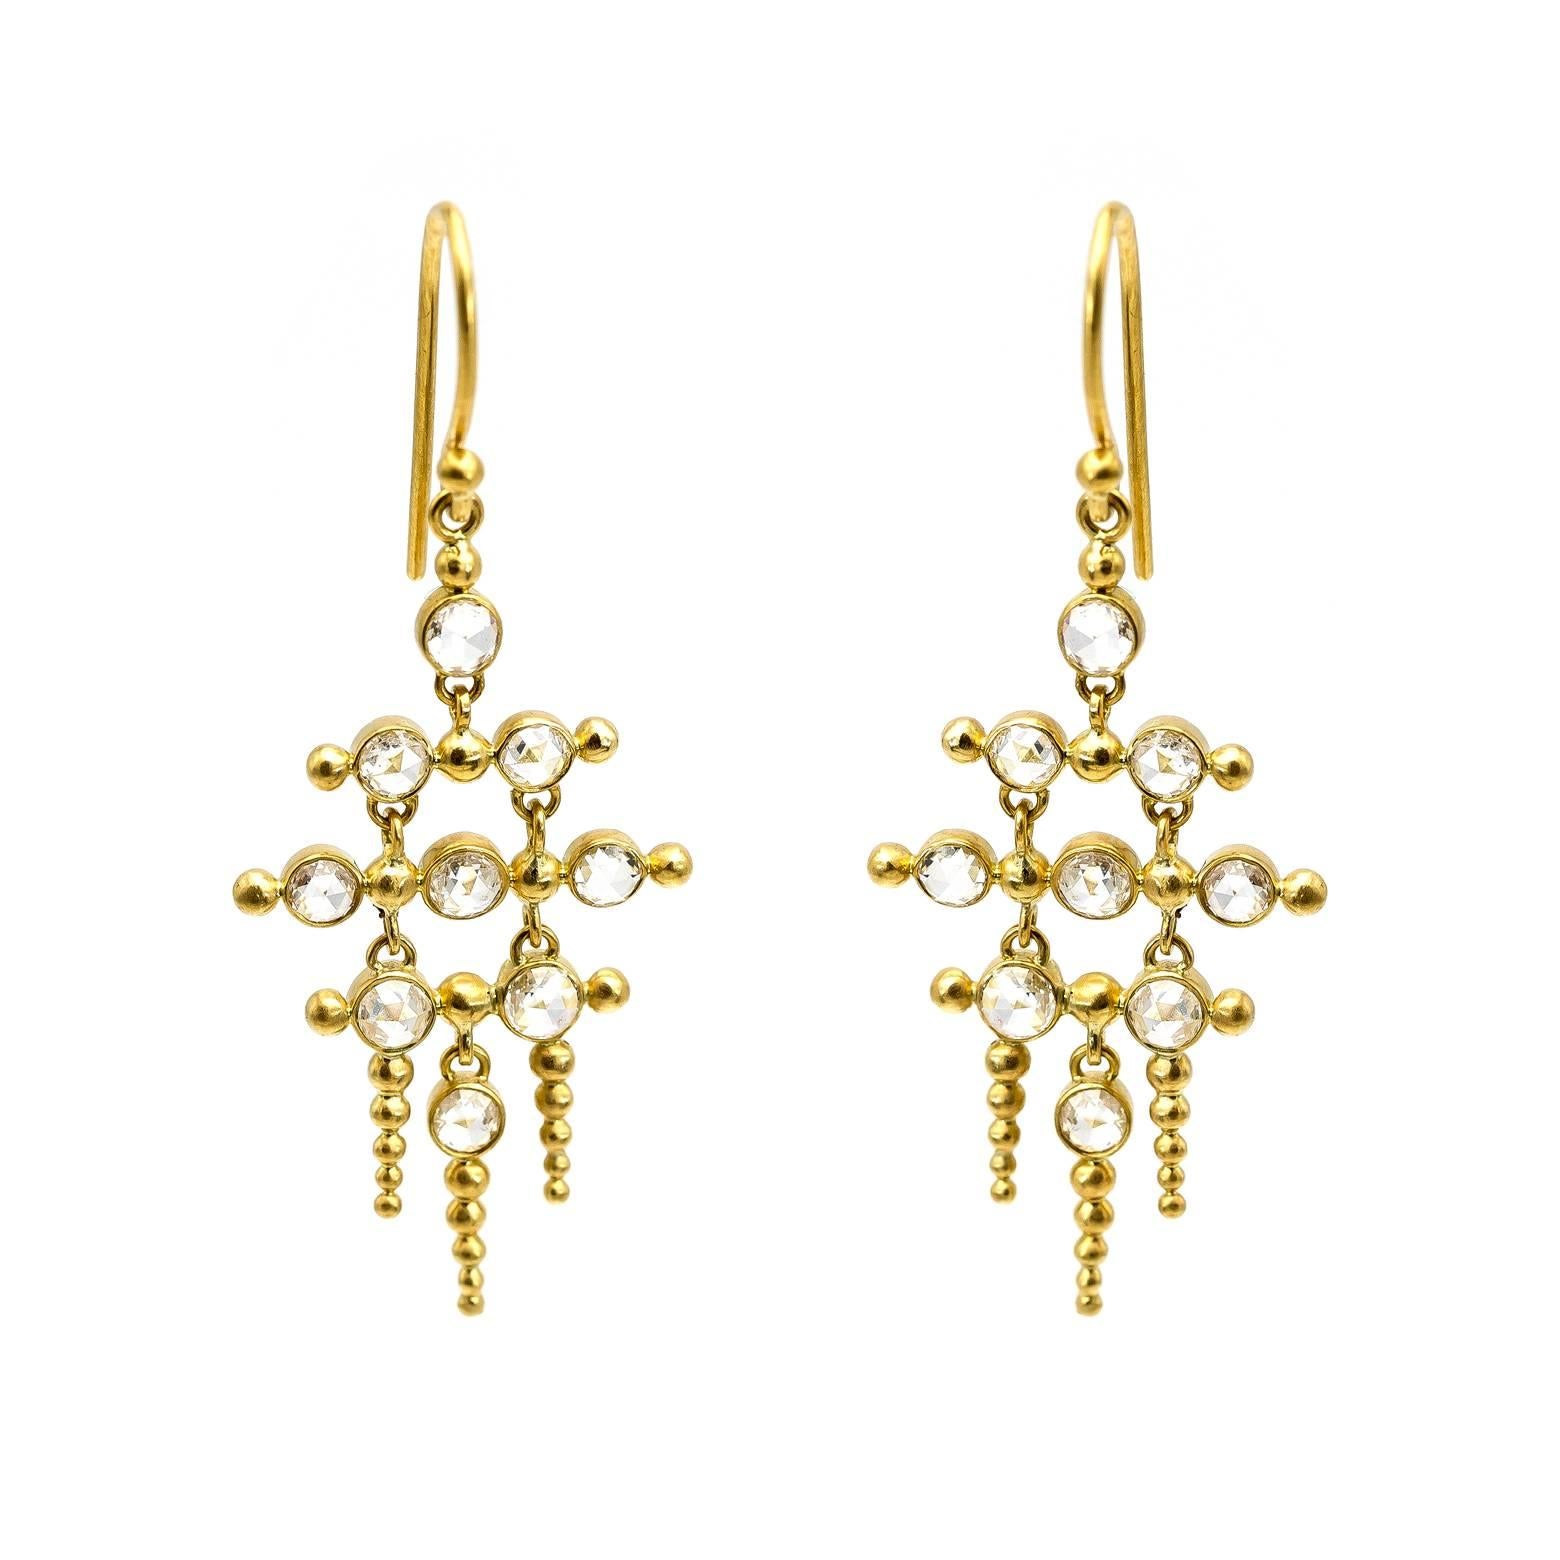 Round Rose Cut Diamond Gold Chandelier Earrings with Gold Pillars